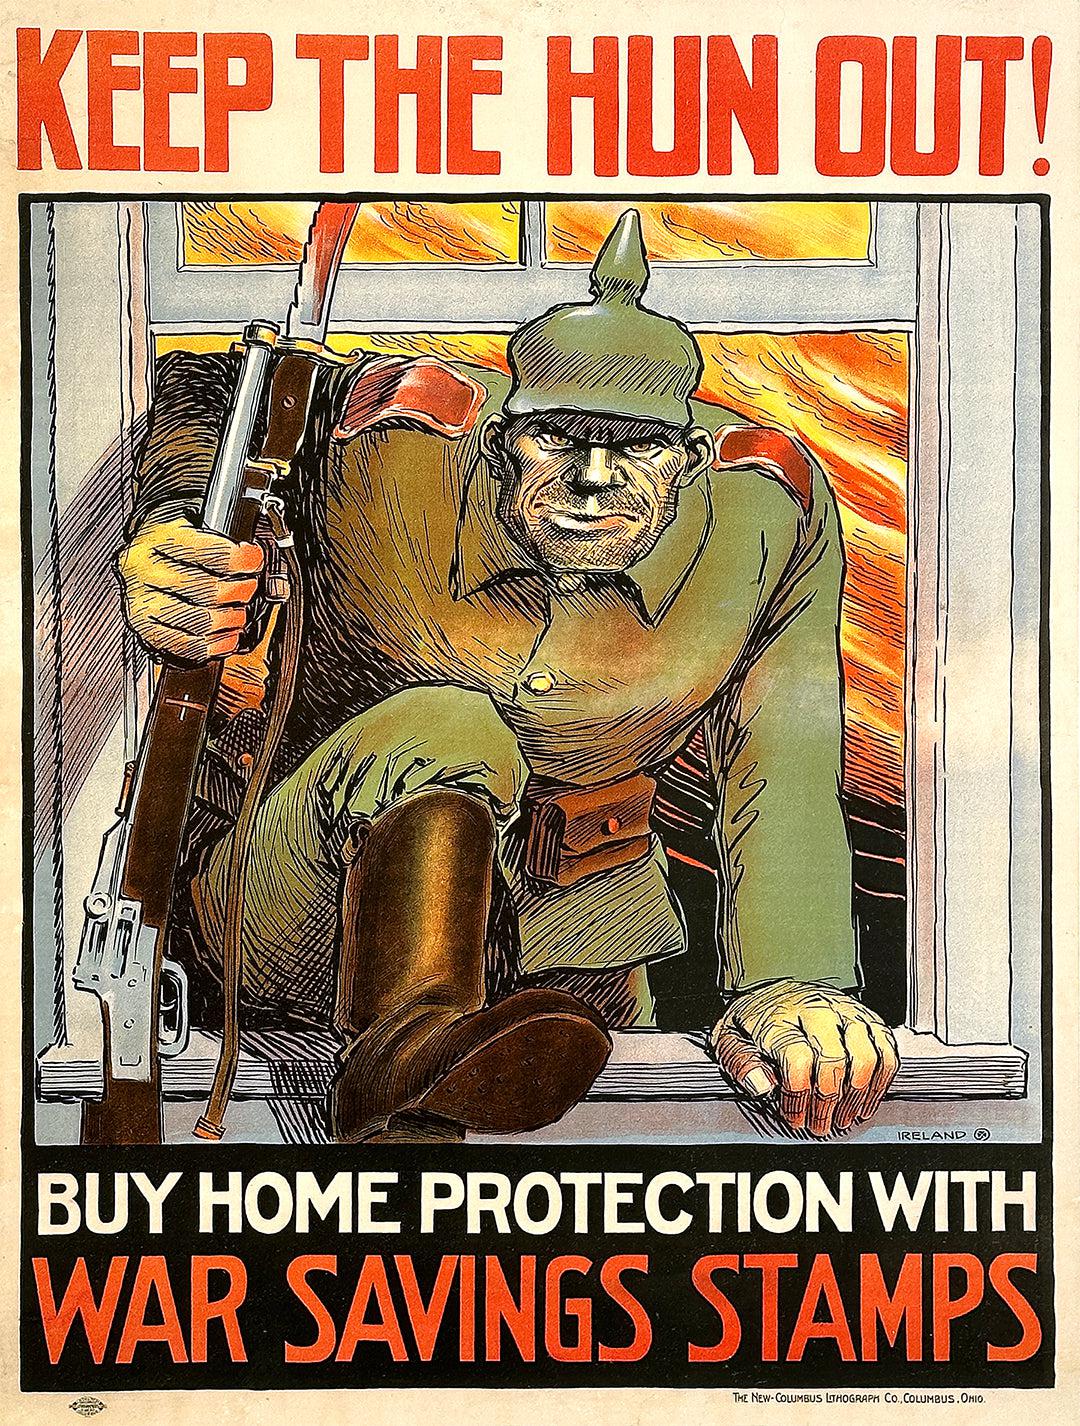 Original Vintage WWI War Savings Stamps Poster Keep the Hun Out by William Ireland